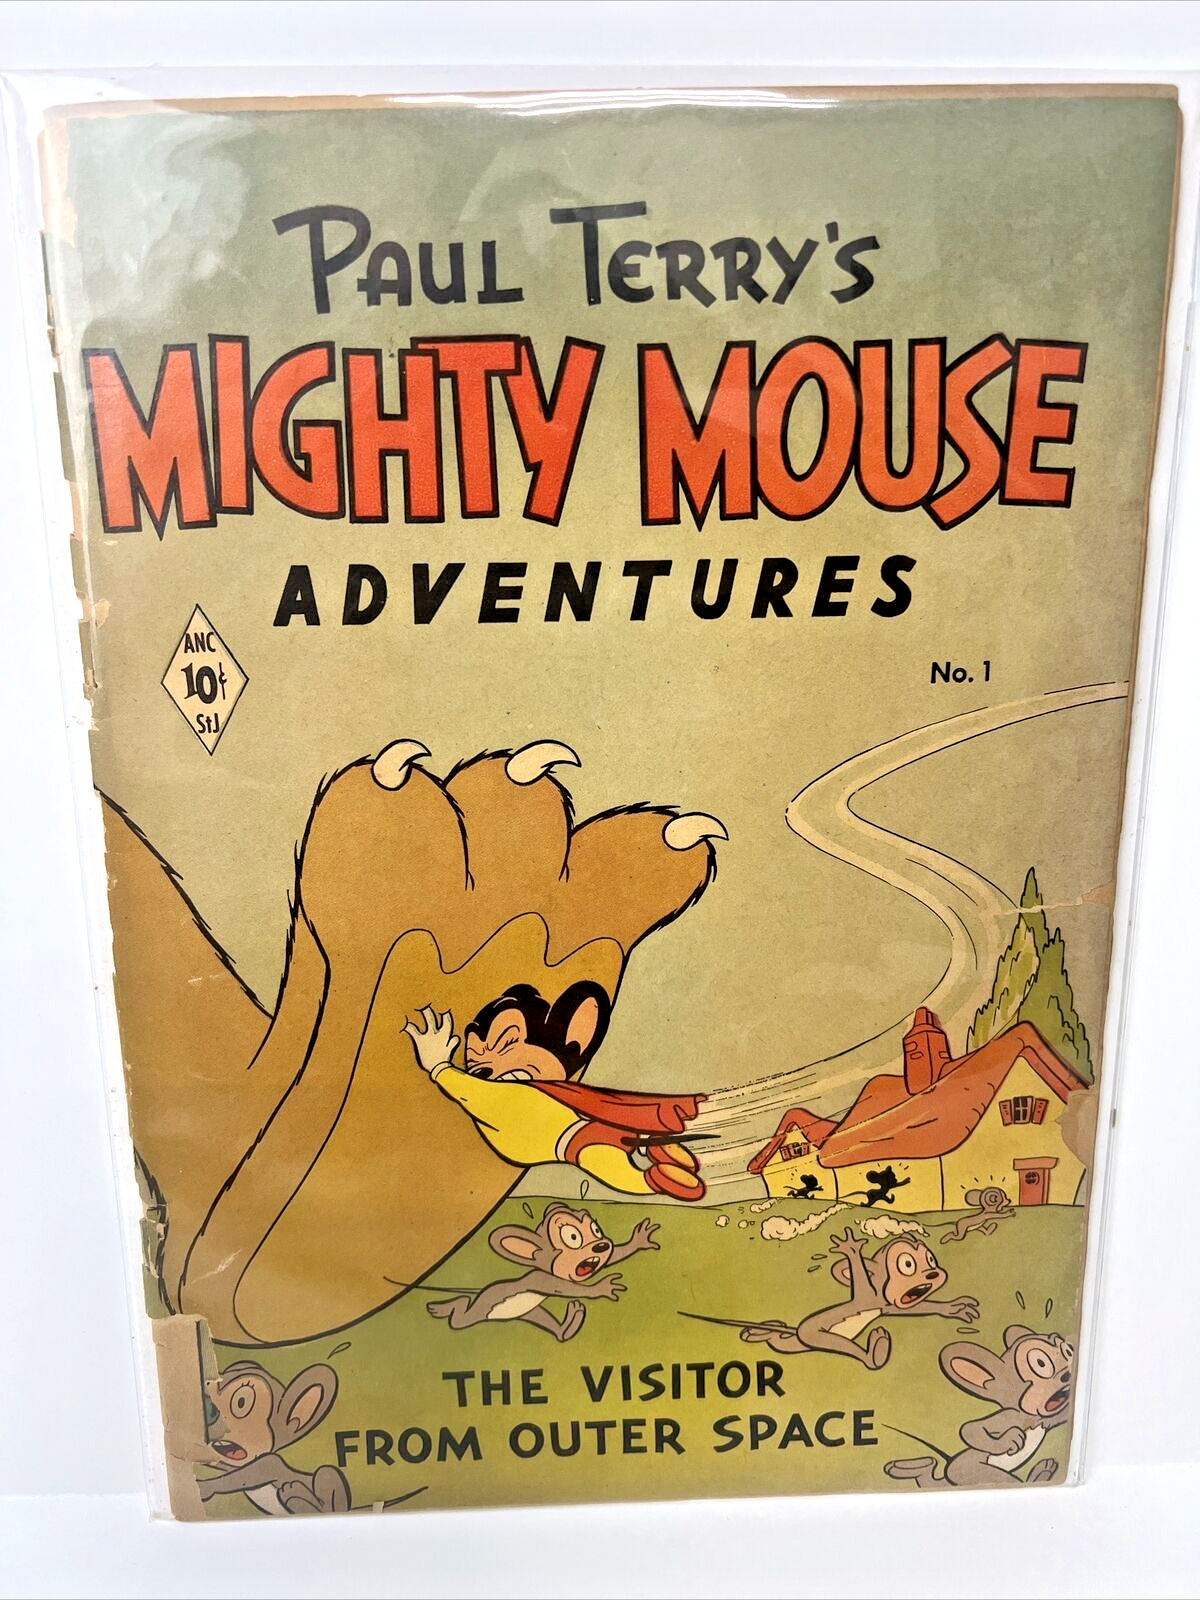 1951 Mighty Mouse Adventures #1 Comic Book Paul Terry St. John Golden Age KEY